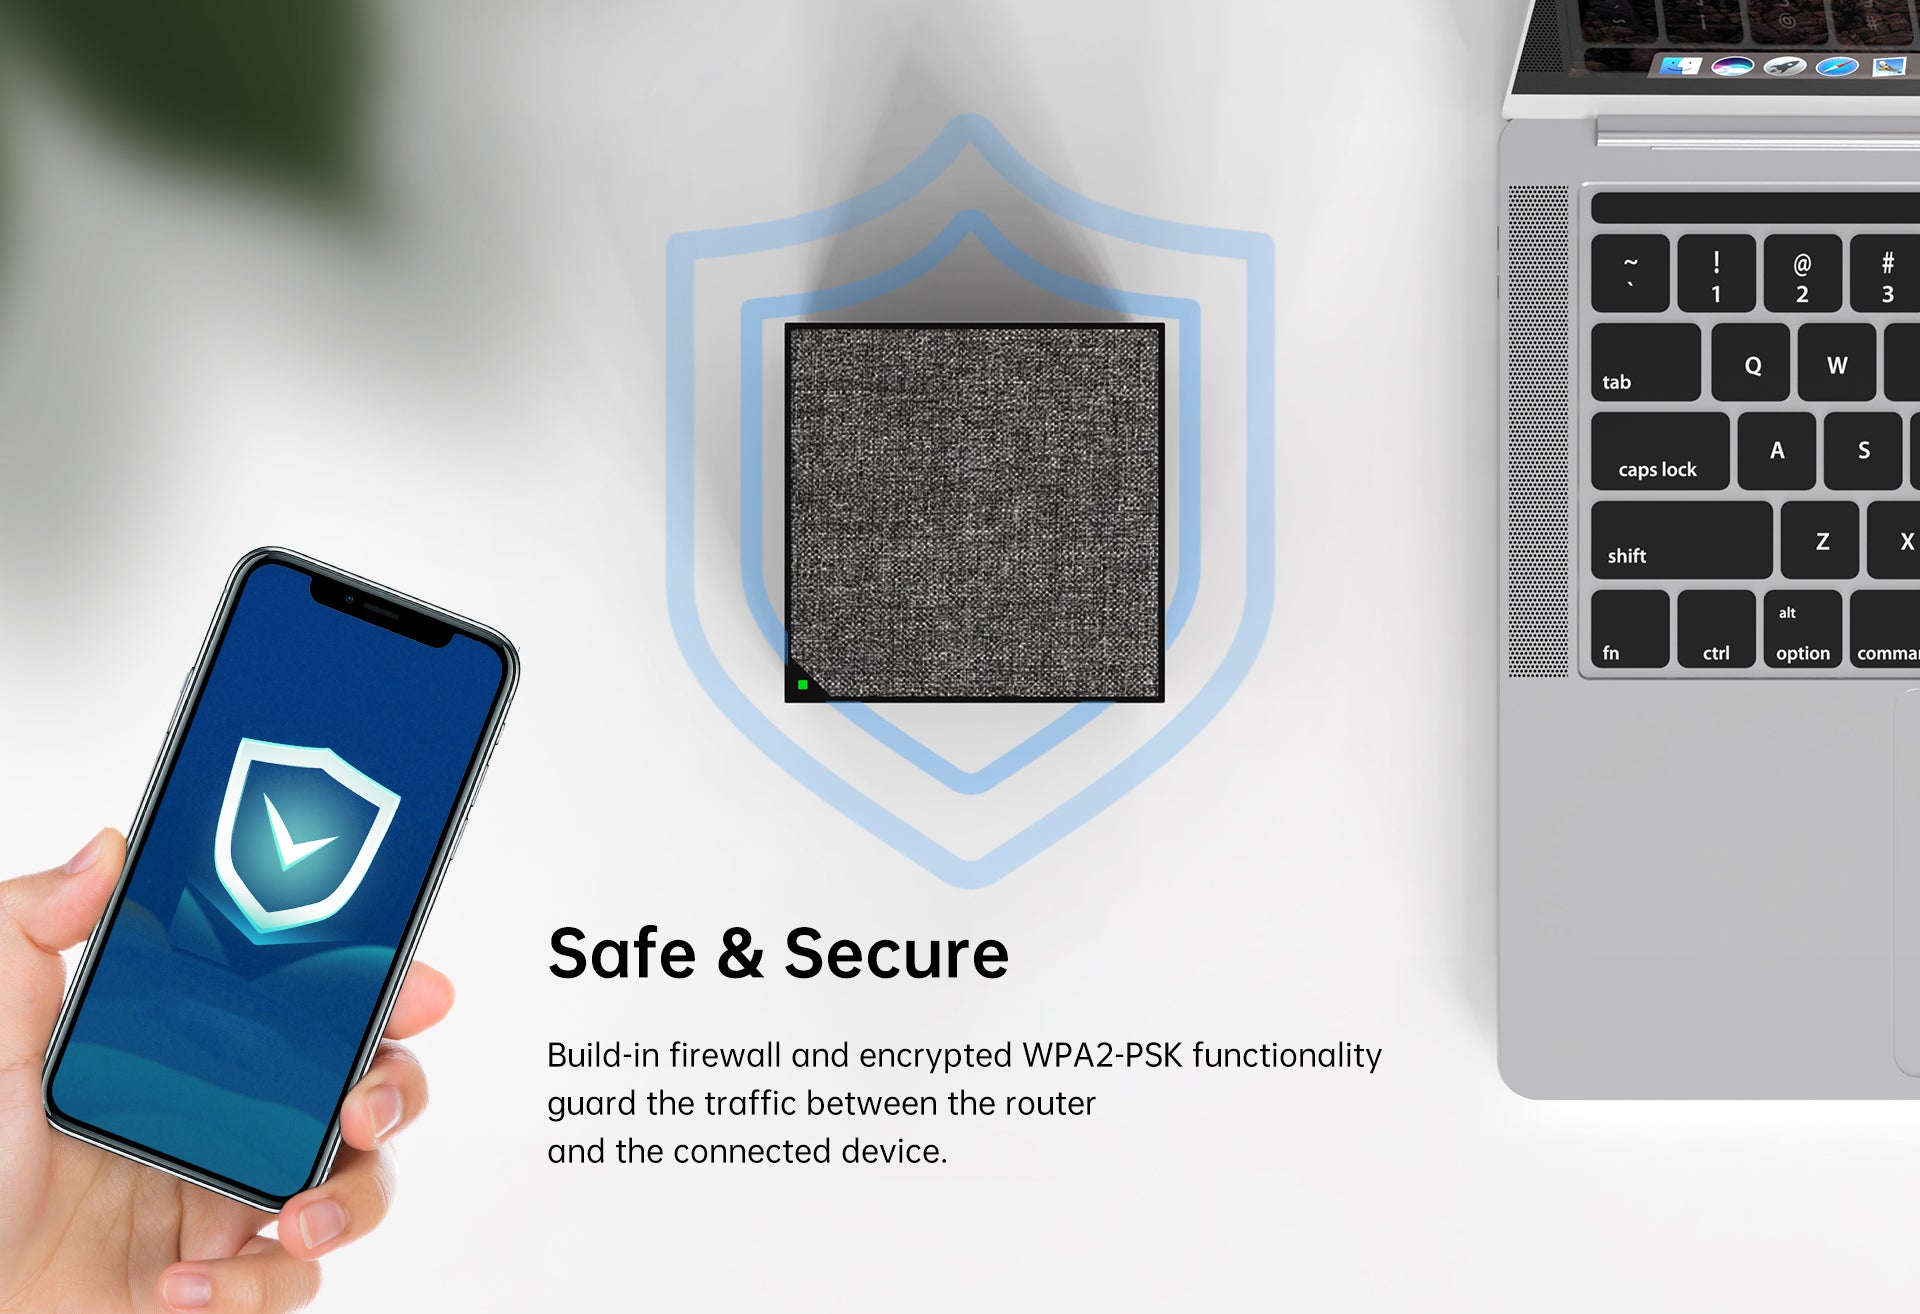 firewall and WPA2-PSK keeps your information safe and secure